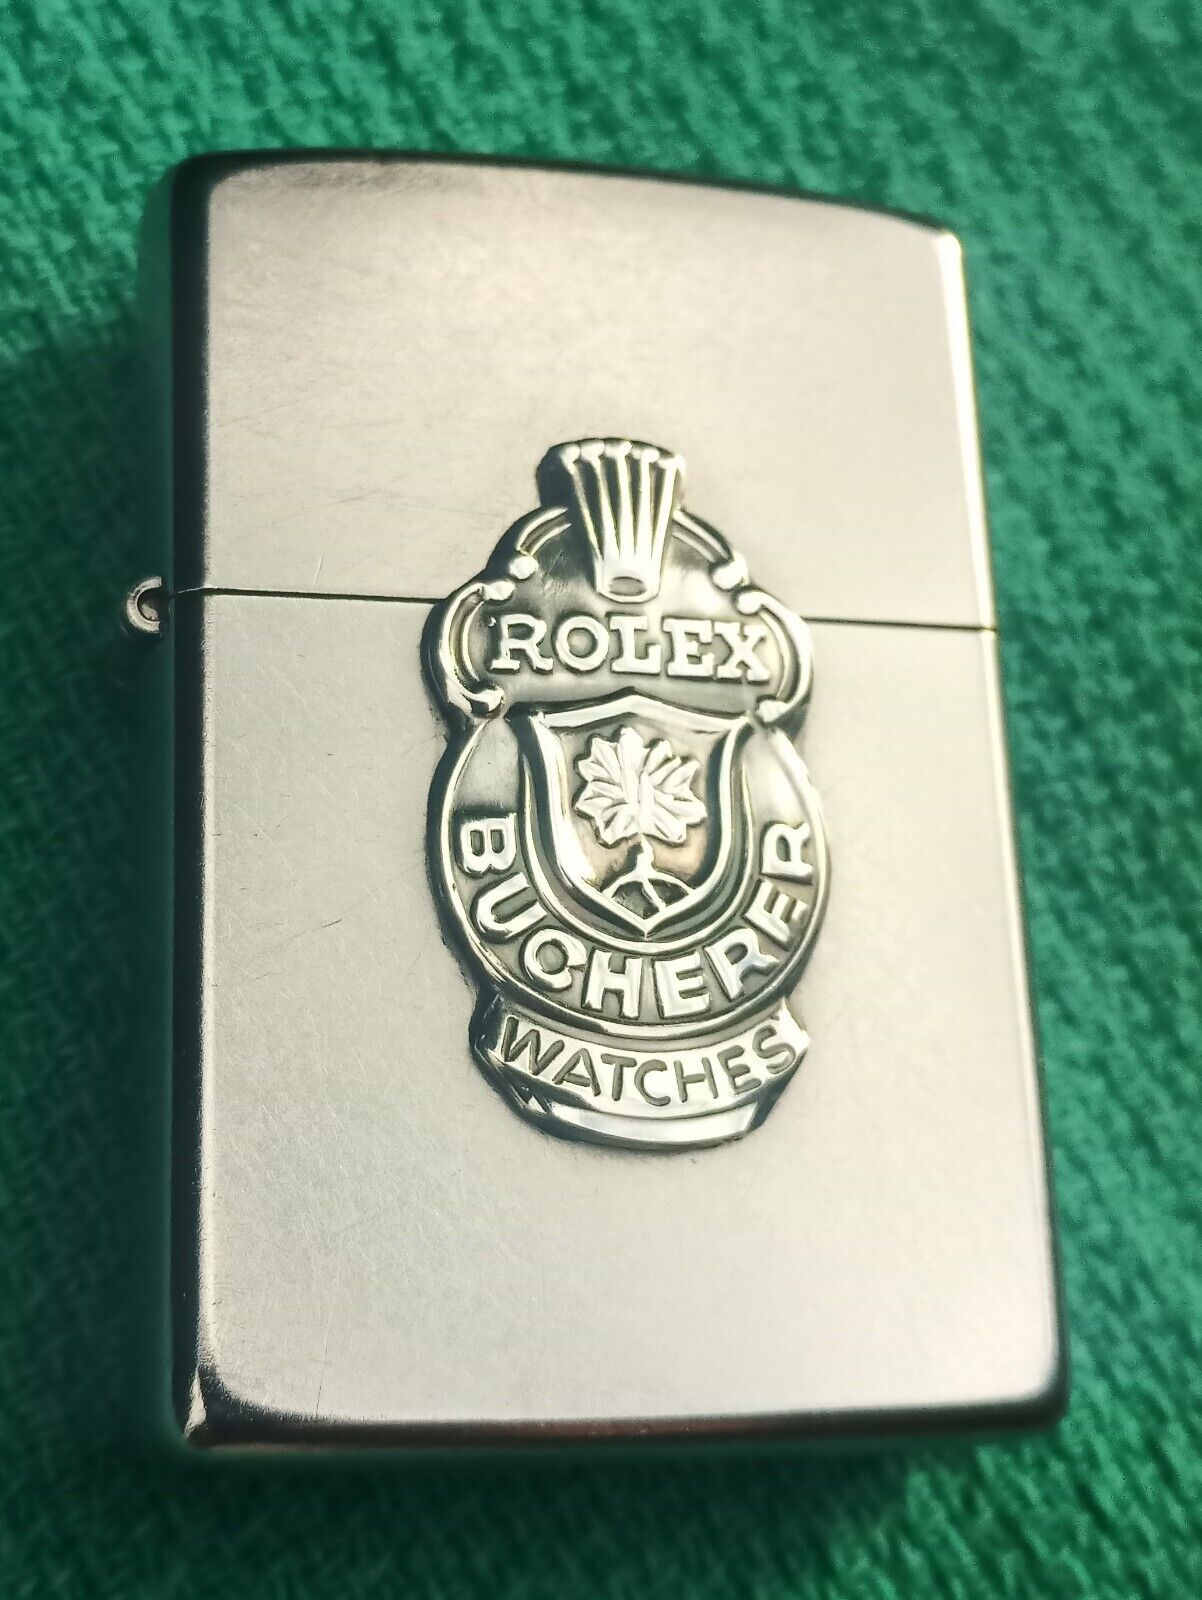 New Vintage Zippo Lighter with Silver Rolex emblem New In Box